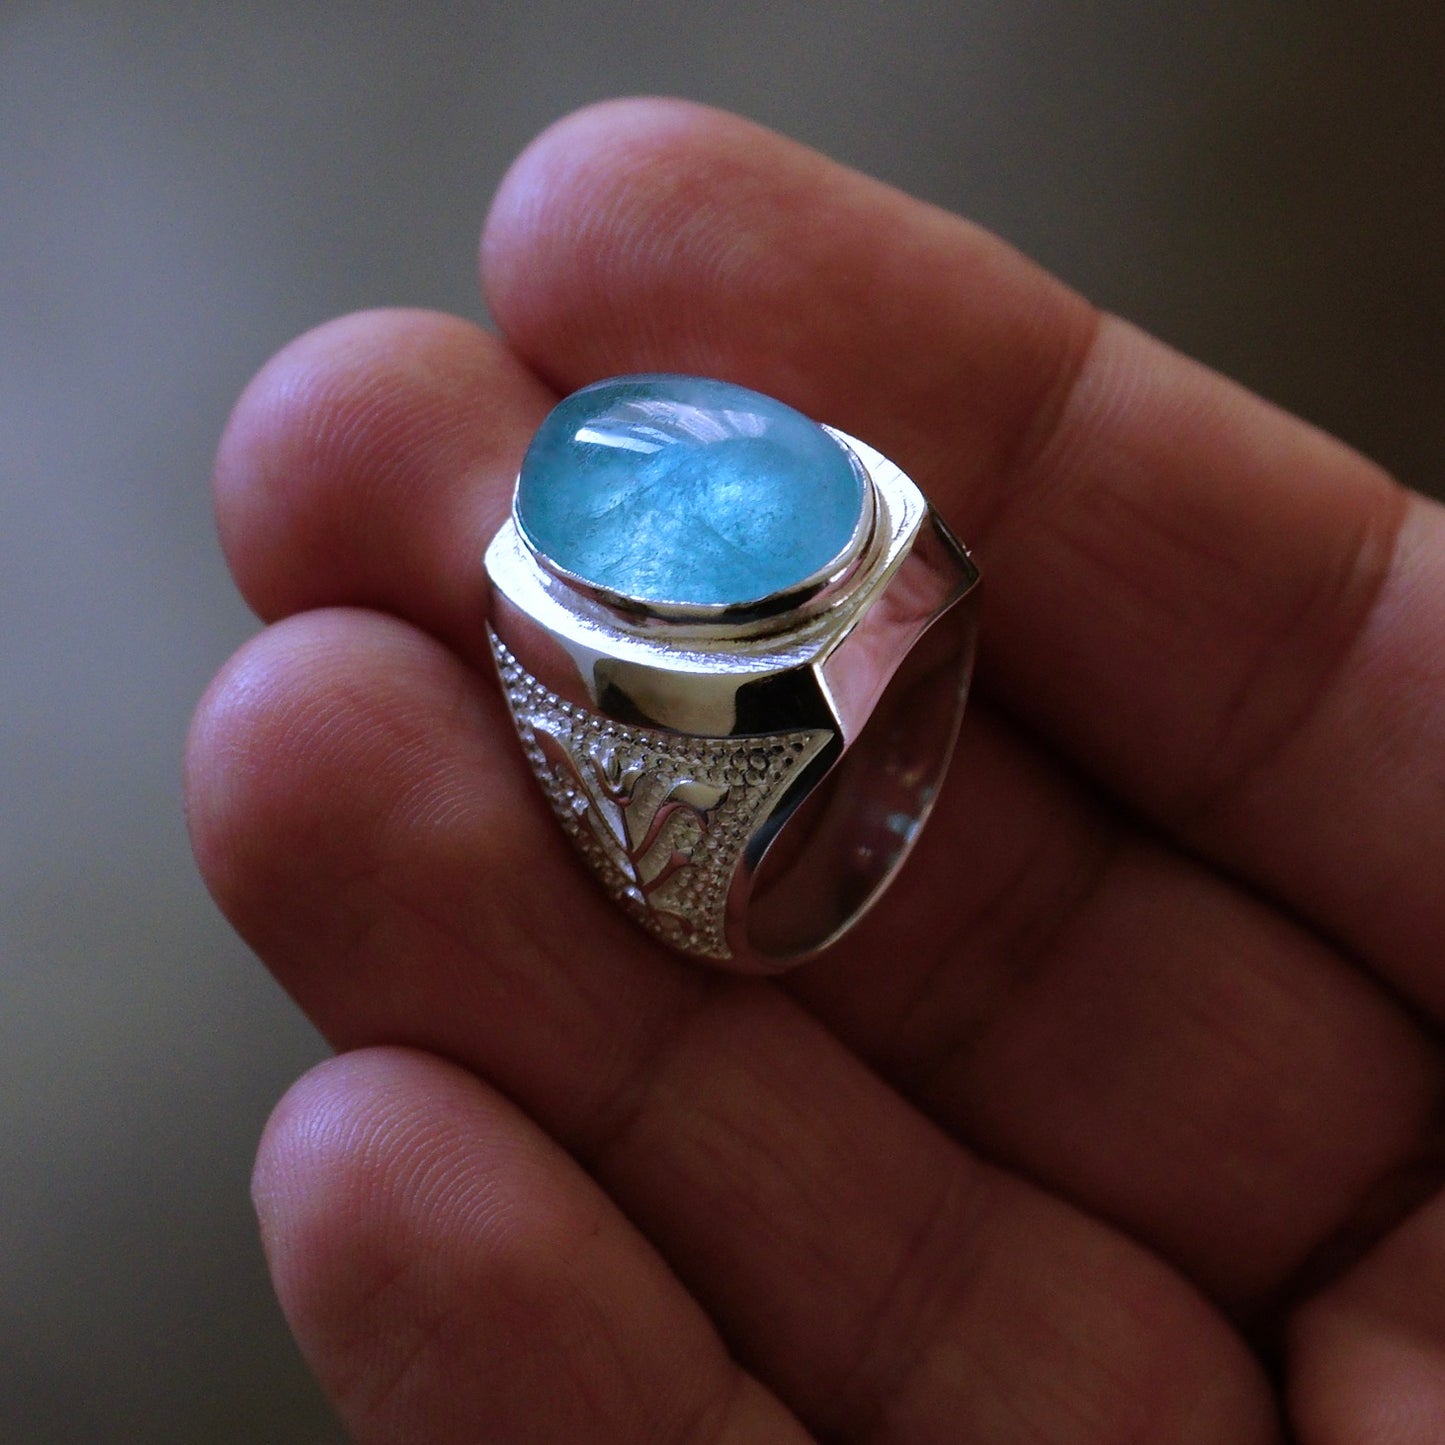 Silver Mens Ring natural Aquamarine gemstone solid 925 Sterling Handmade Unique Artisan Jewelry